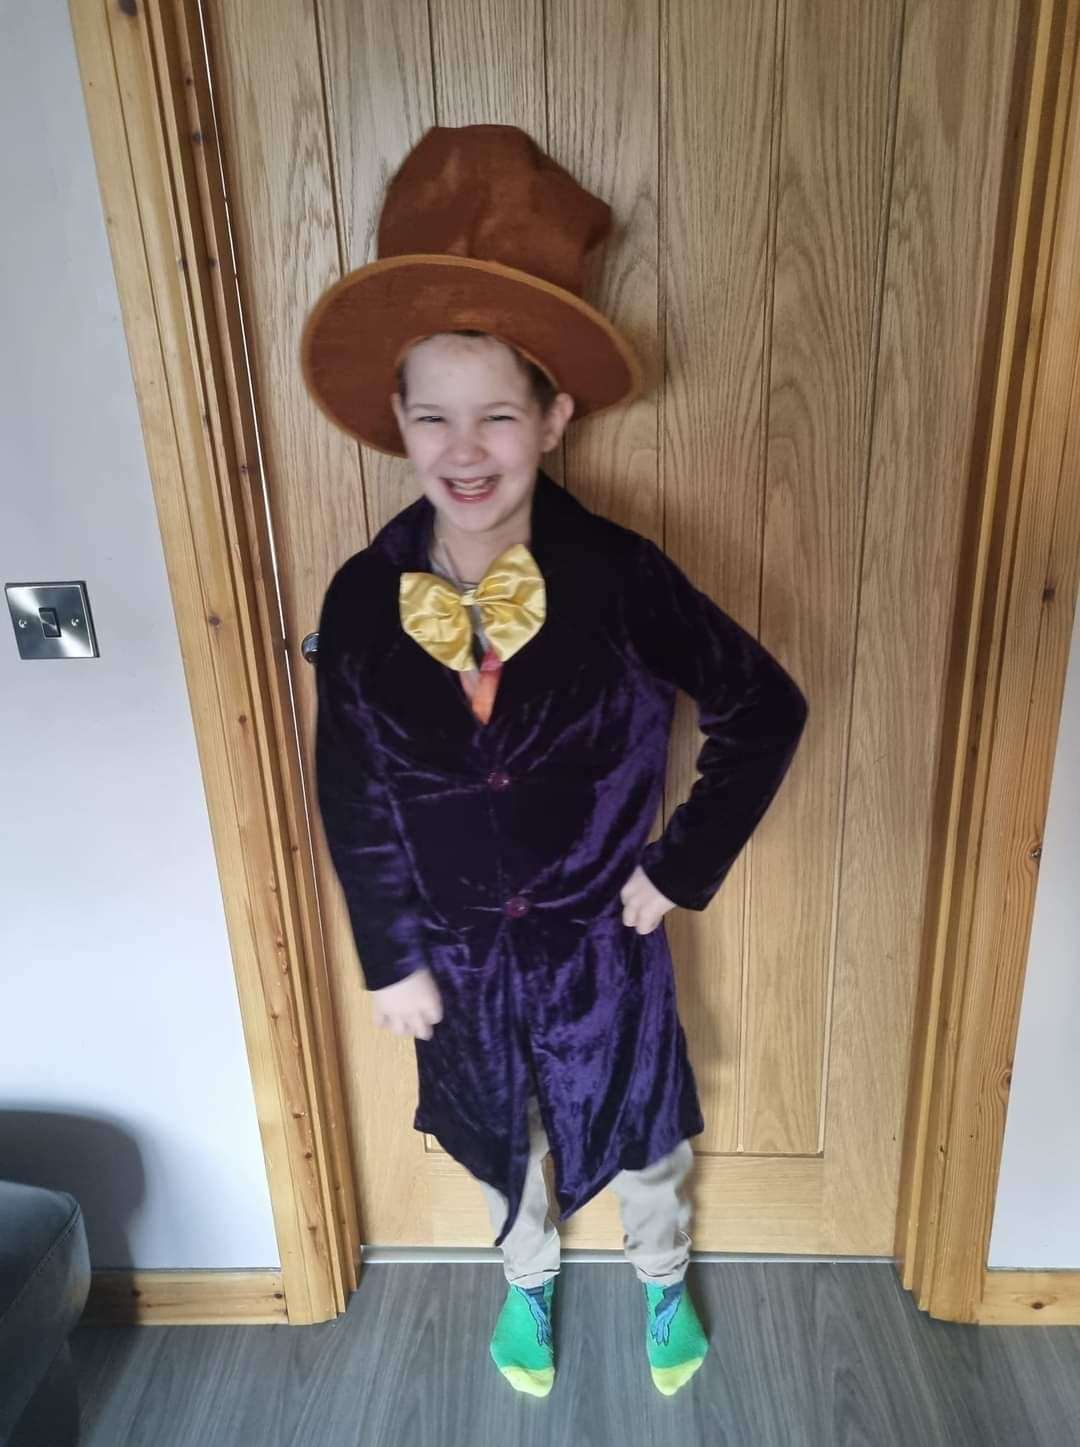 Ethan dressed as Willy Wonka. Picture: Lianne Cumming.